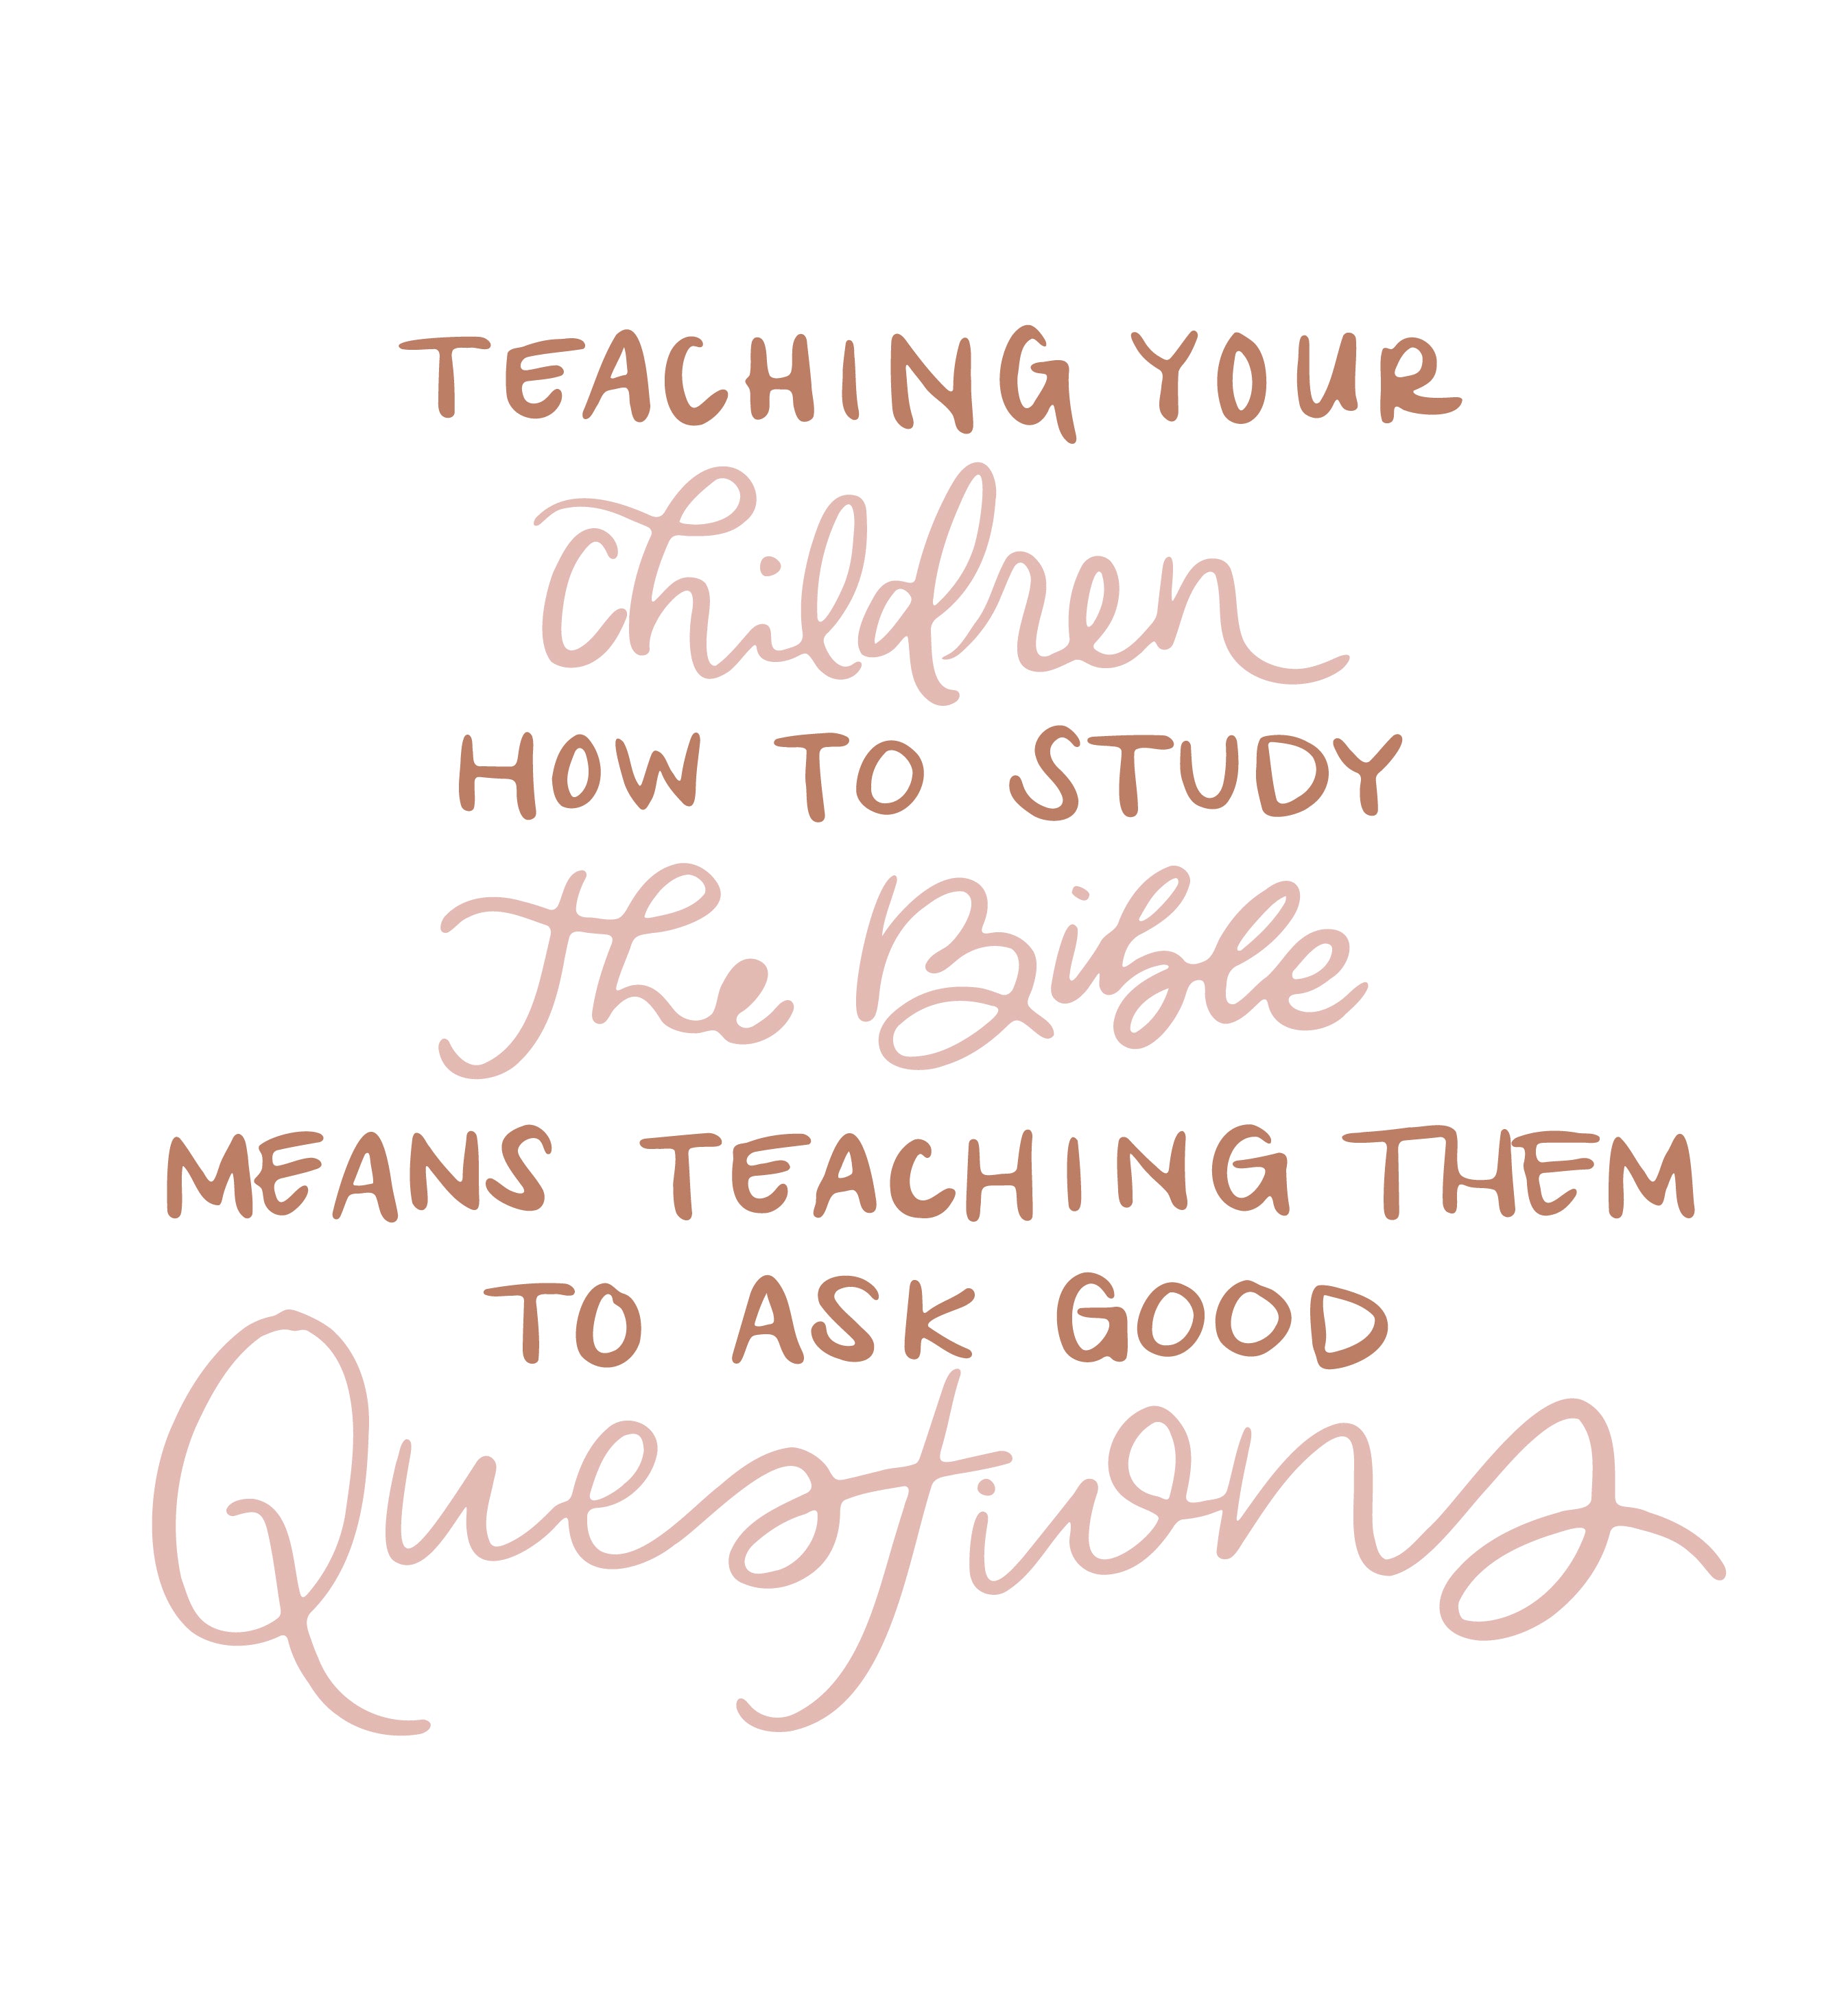 Teaching your children to study the Bible means teaching them to ask good questions | TDGC